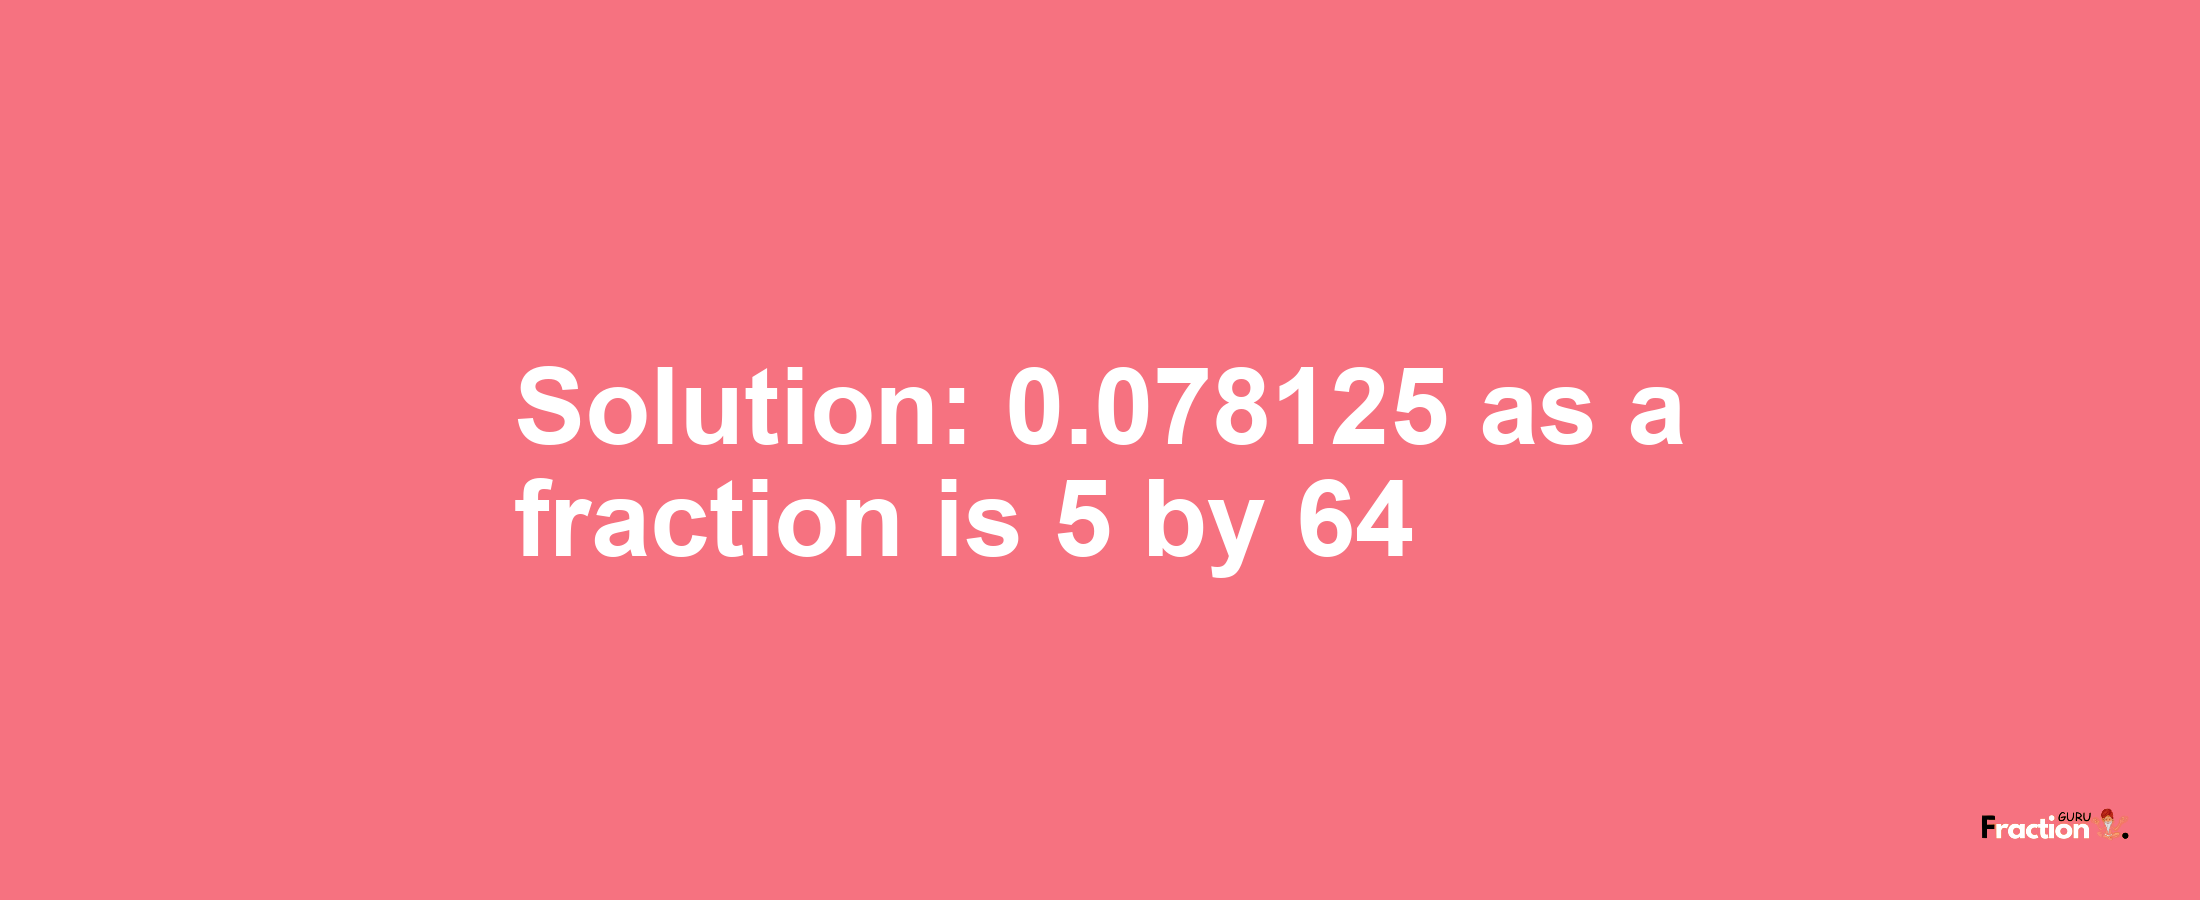 Solution:0.078125 as a fraction is 5/64